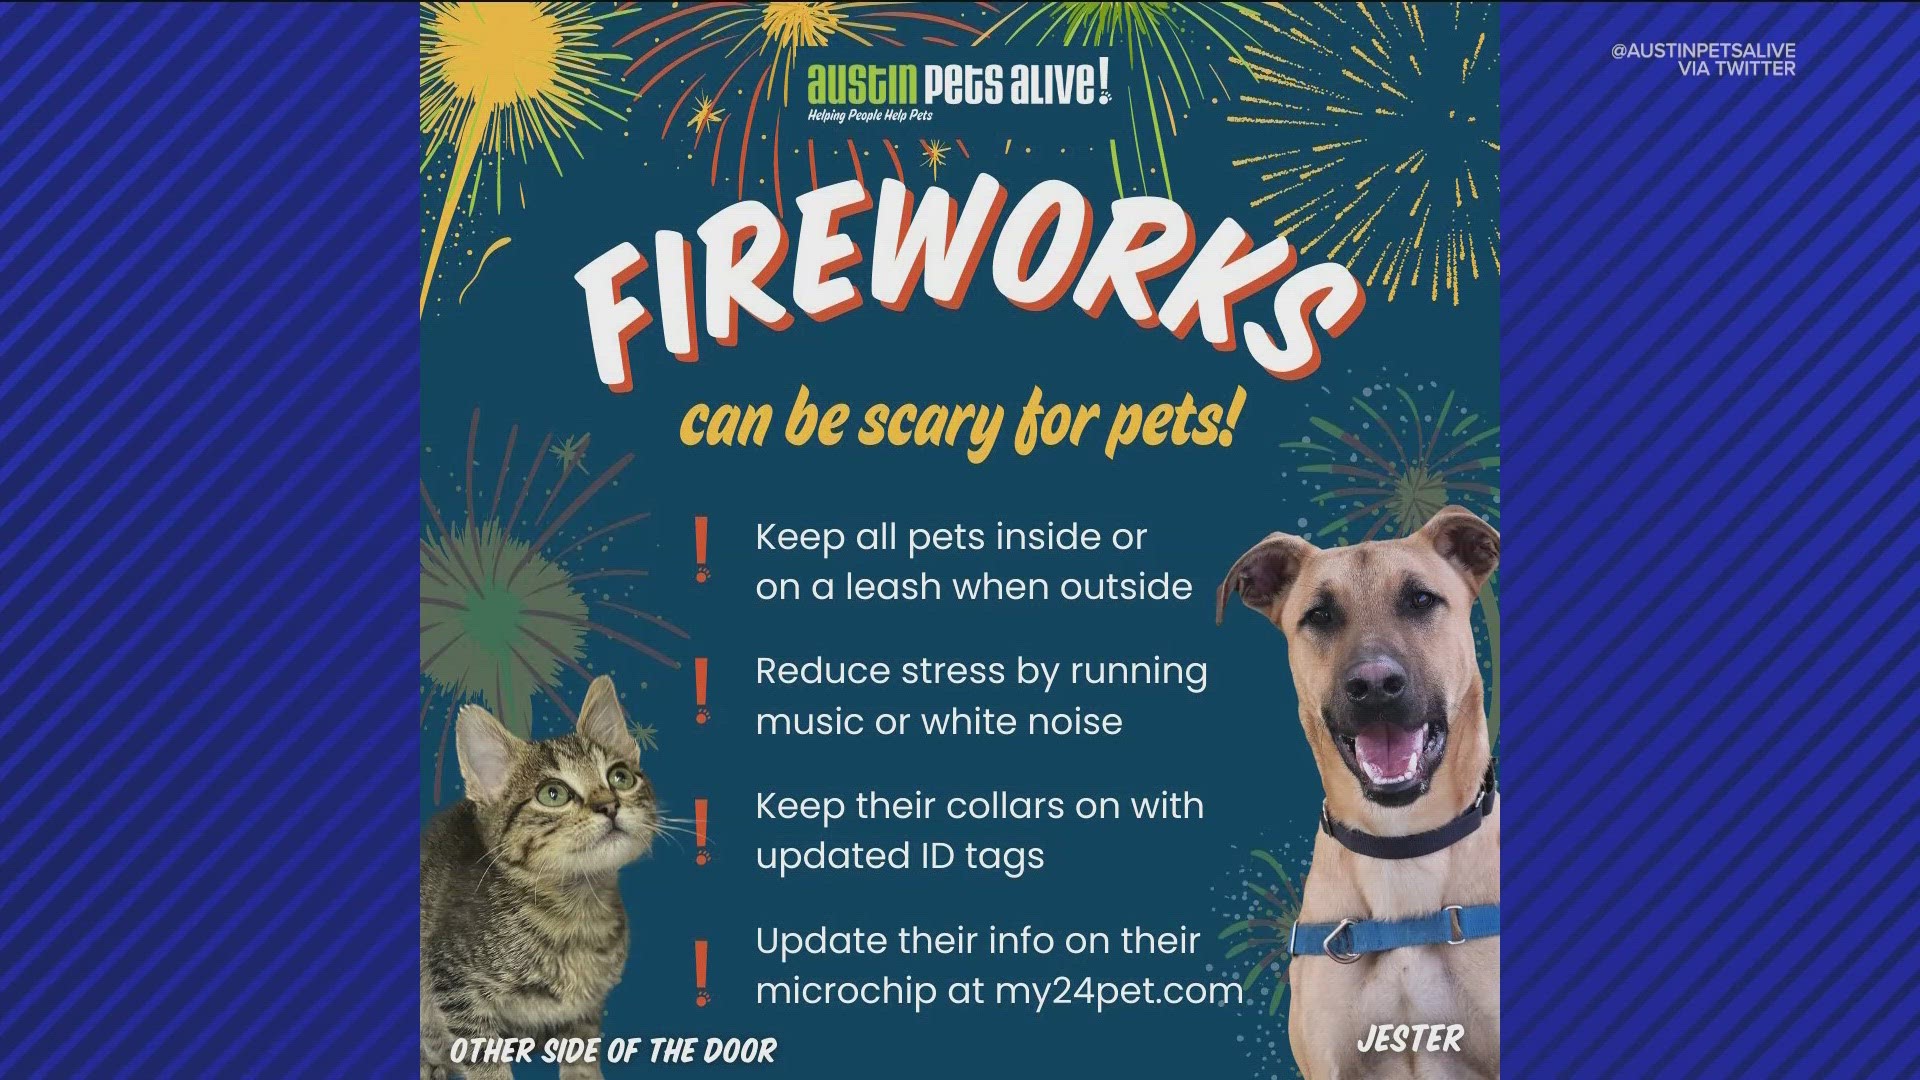 Austin Pets Alive! is sharing some tips for how to keep your pets calm during Fourth of July celebrations.